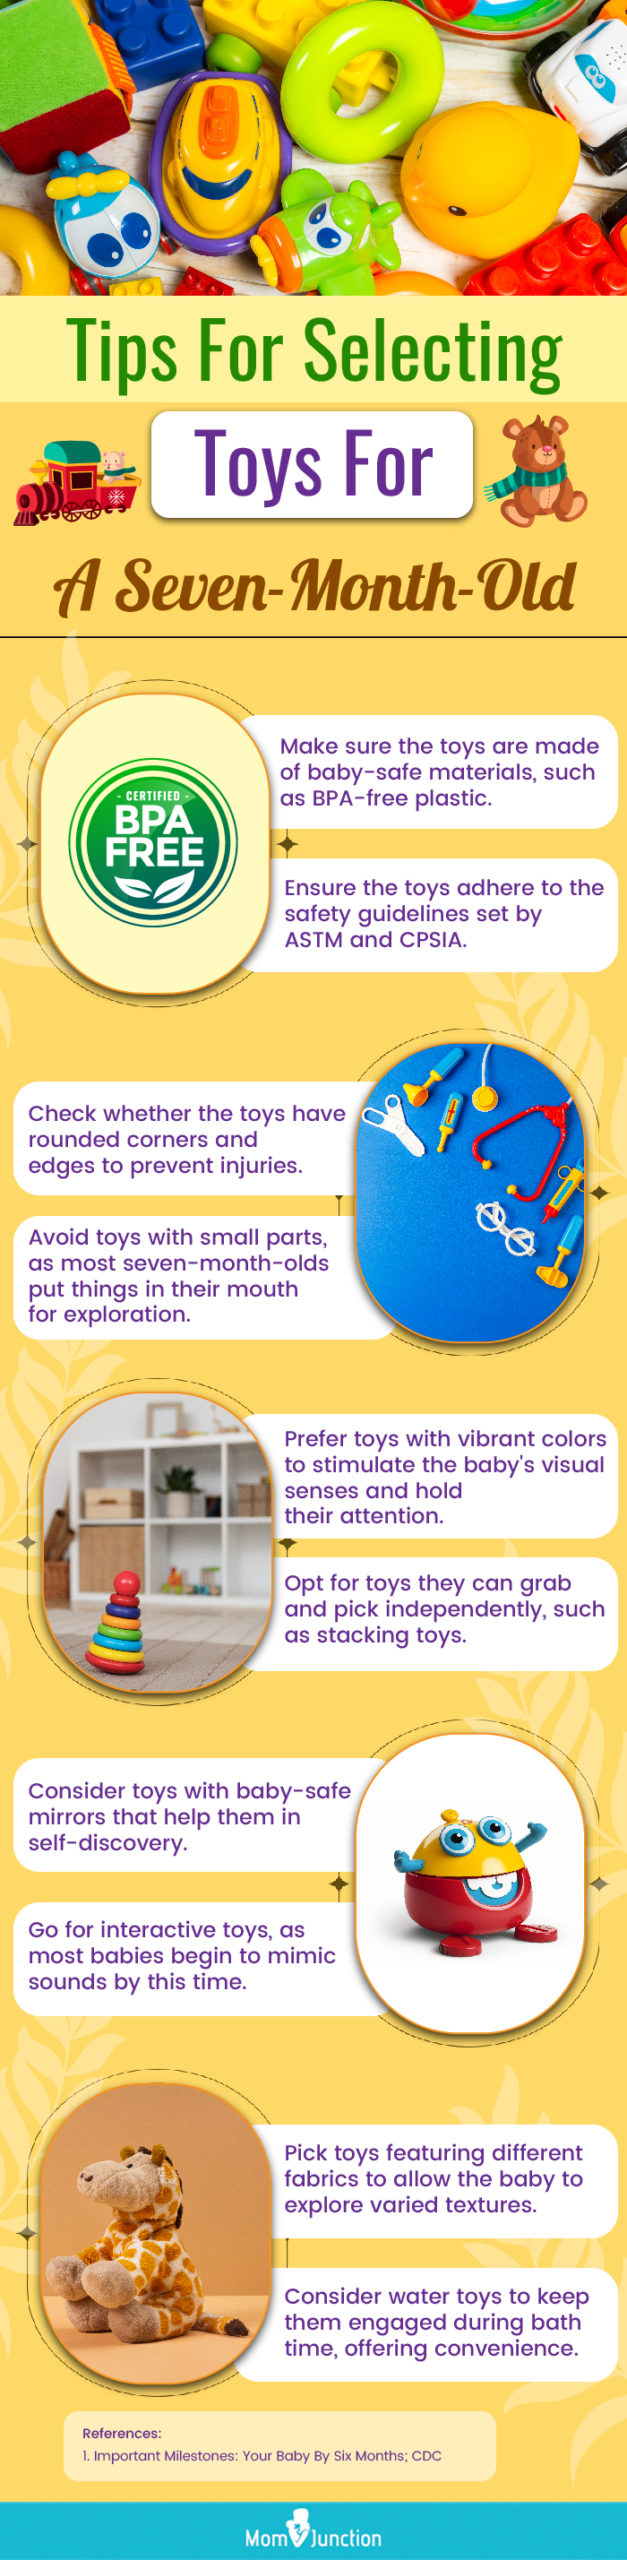 Tips For Selecting Toys For A Seven-Month-Old (infographic)